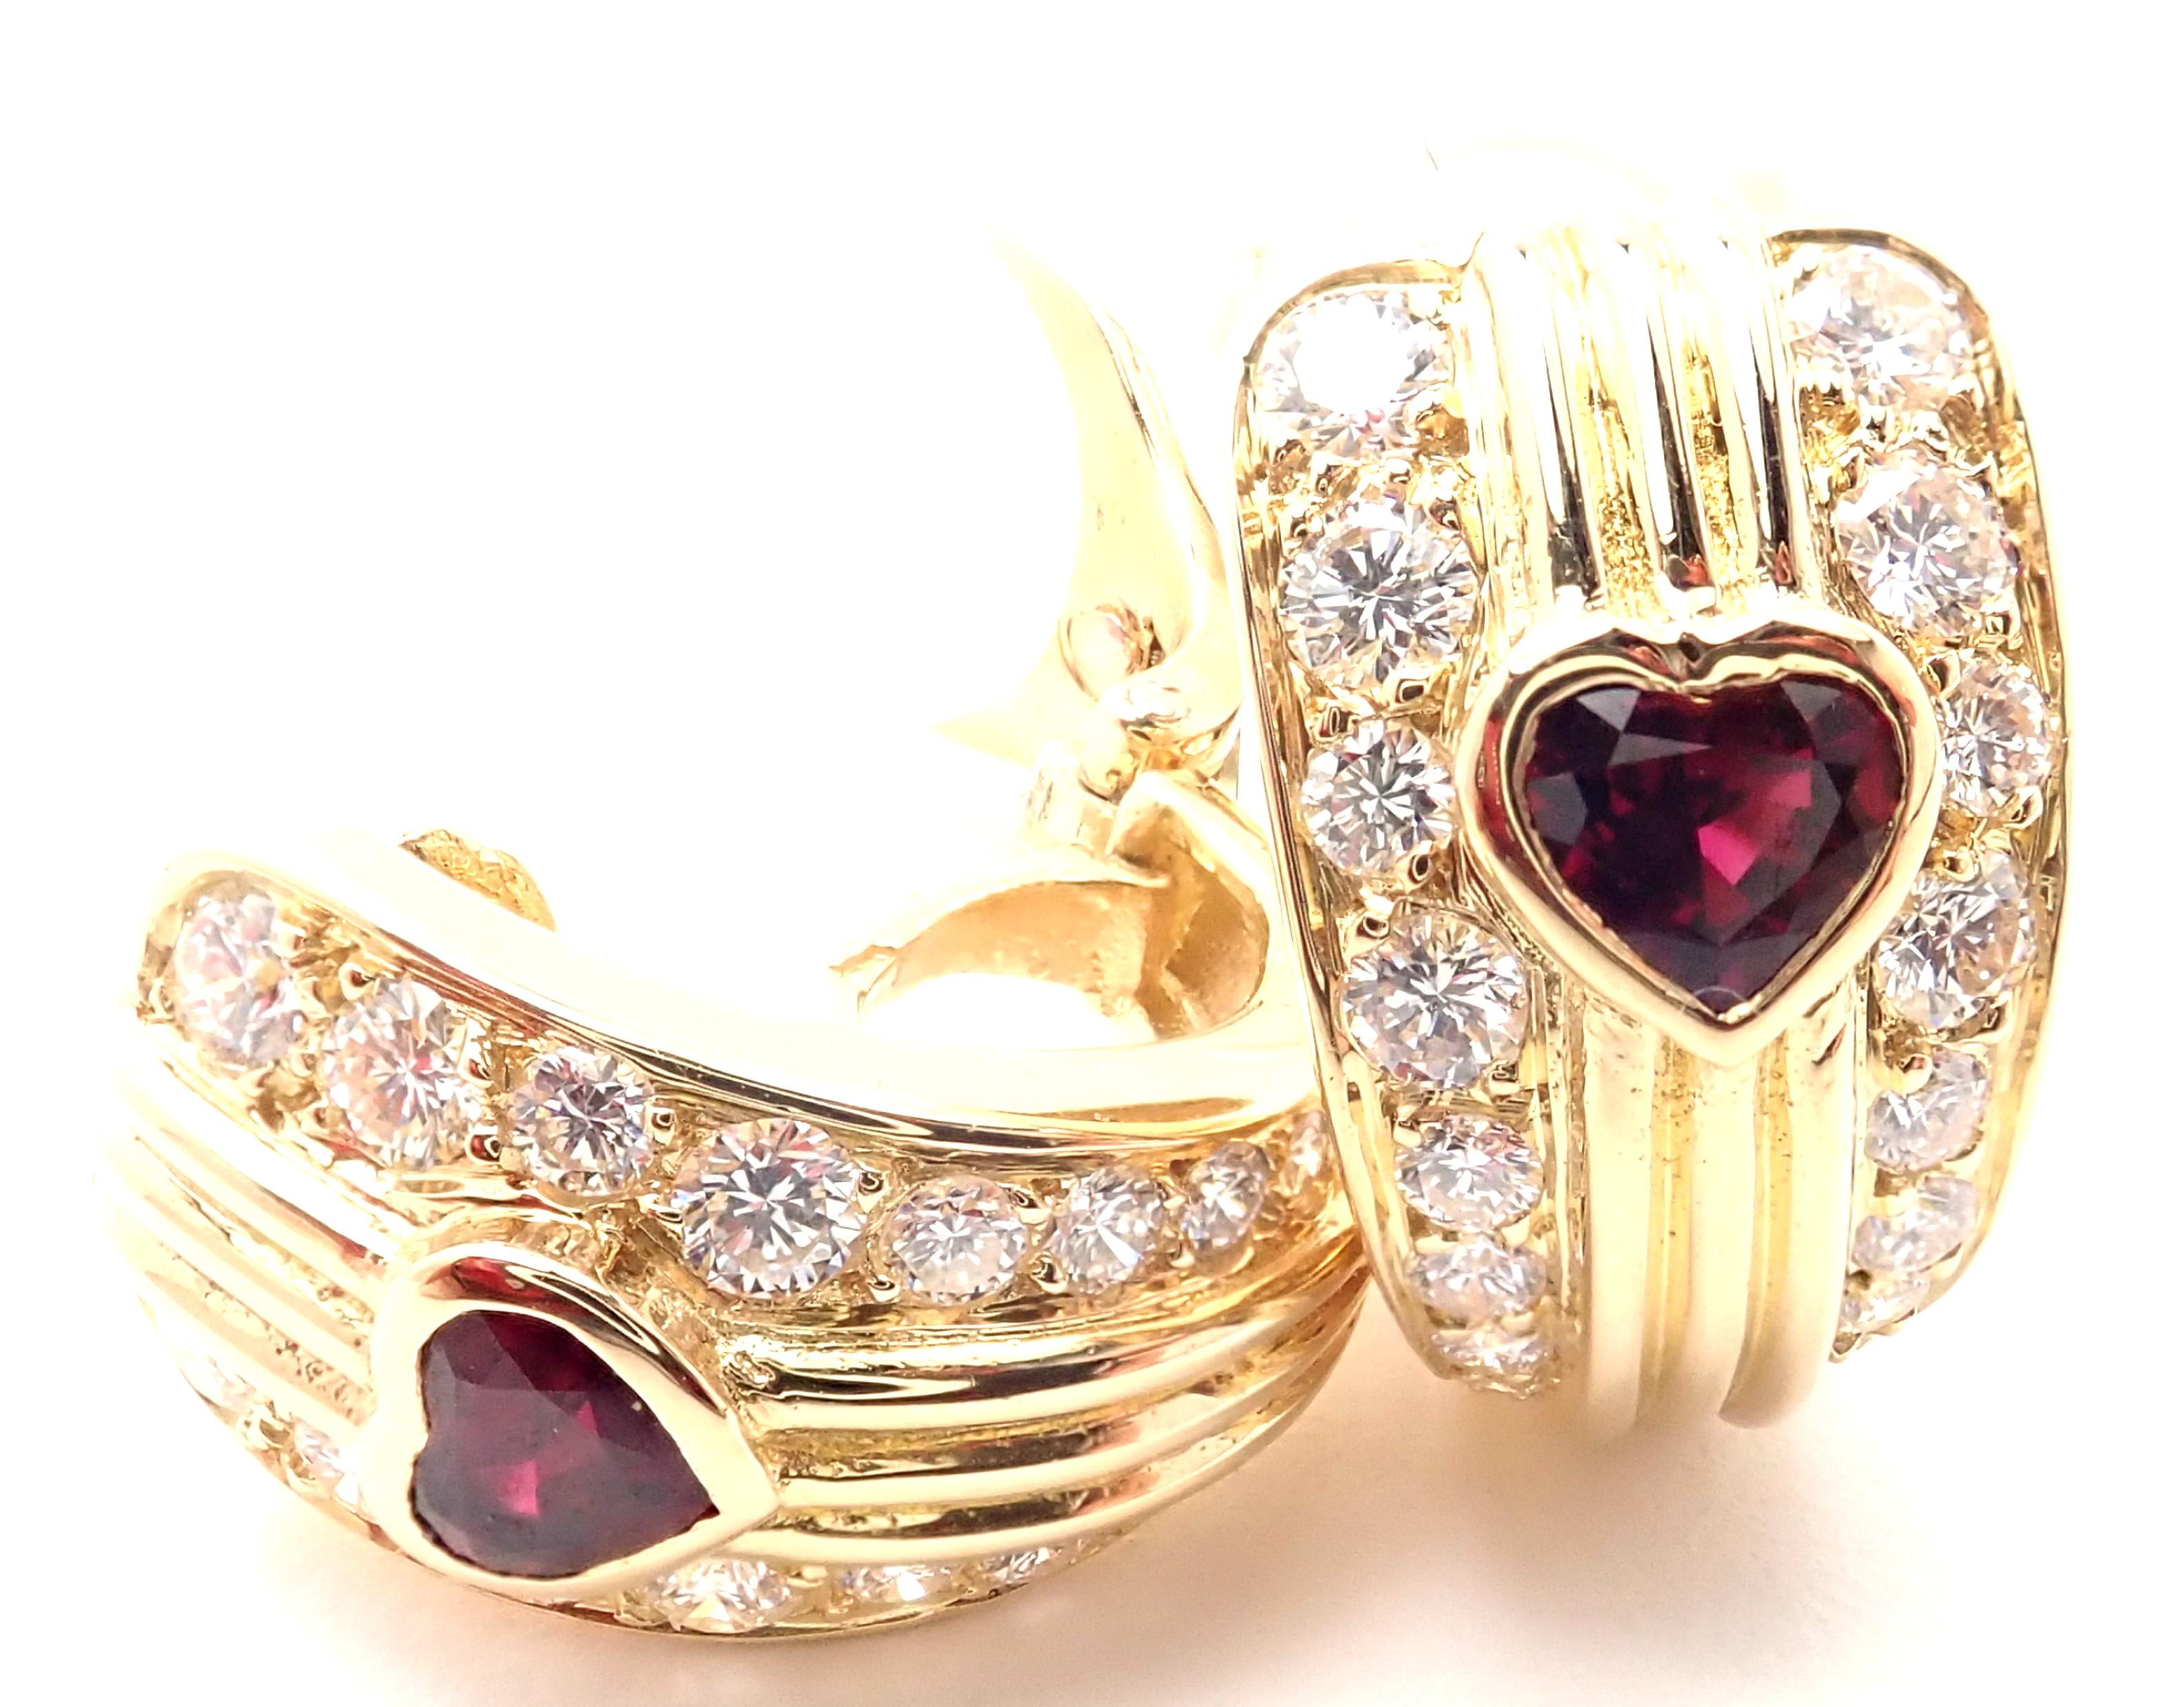 18k Yellow Gold Diamond And Ruby Heart Earrings by Van Cleef & Arpels. 
These earrings are made for non pierced ears, but they can be converted by adding posts. 
With 32 round brilliant cut diamonds VVS1 clarity, E color total weight approx. 1ct
2